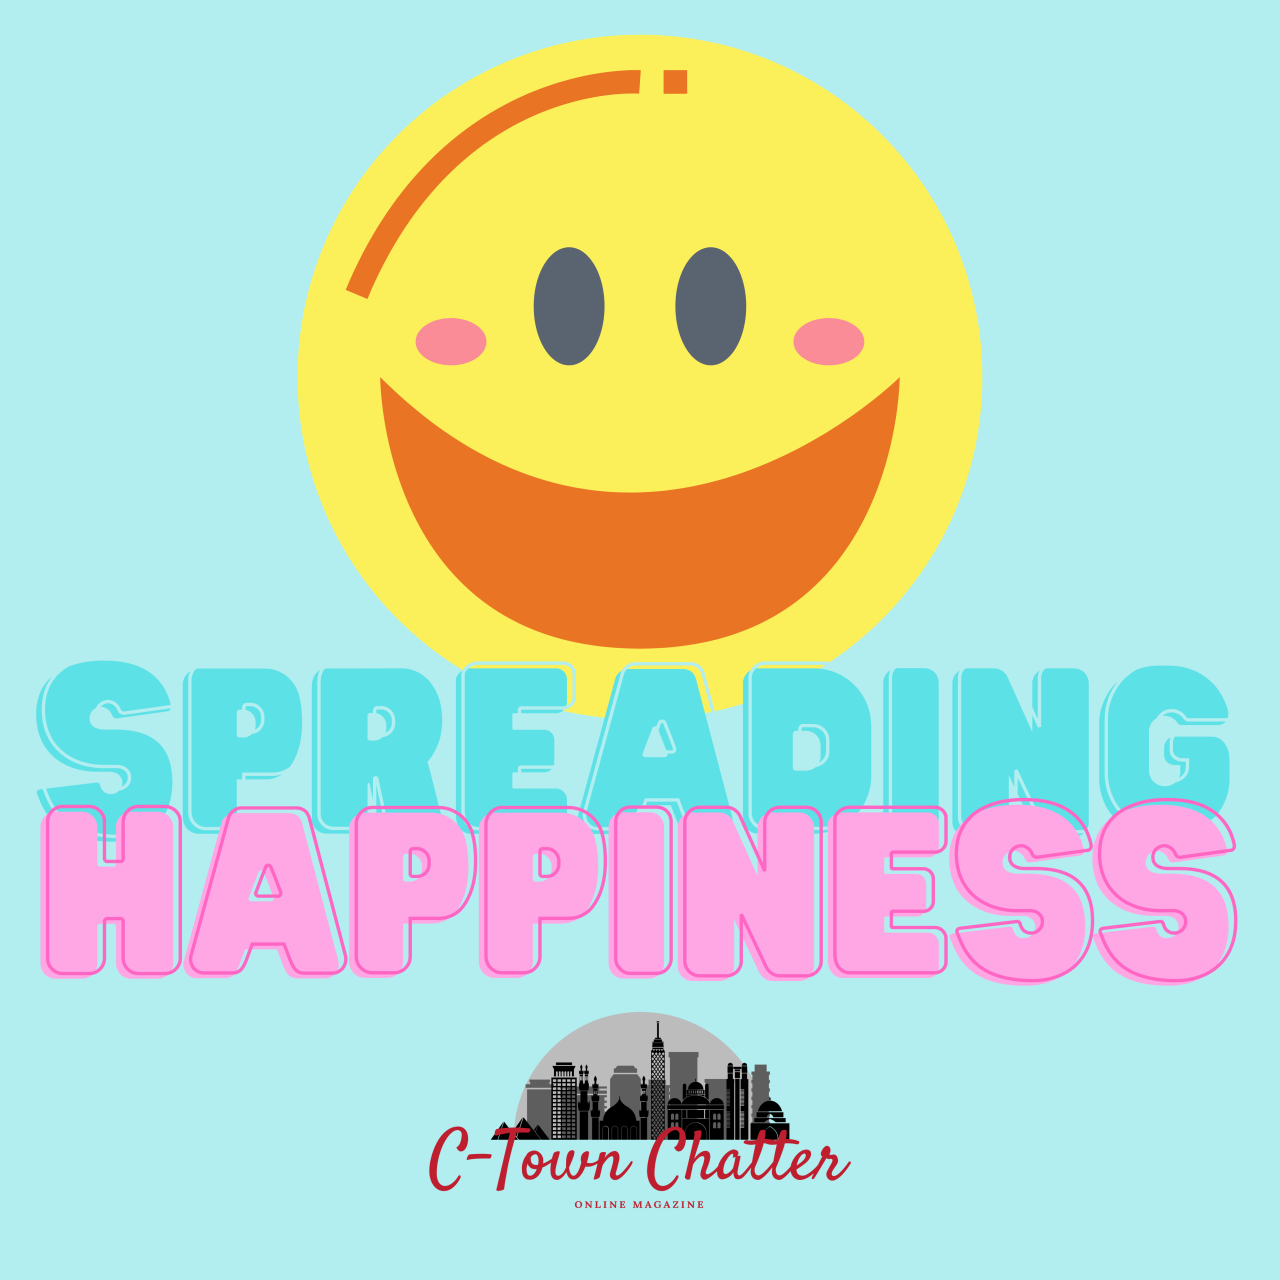 spreading happiness c town chatter online magazine 